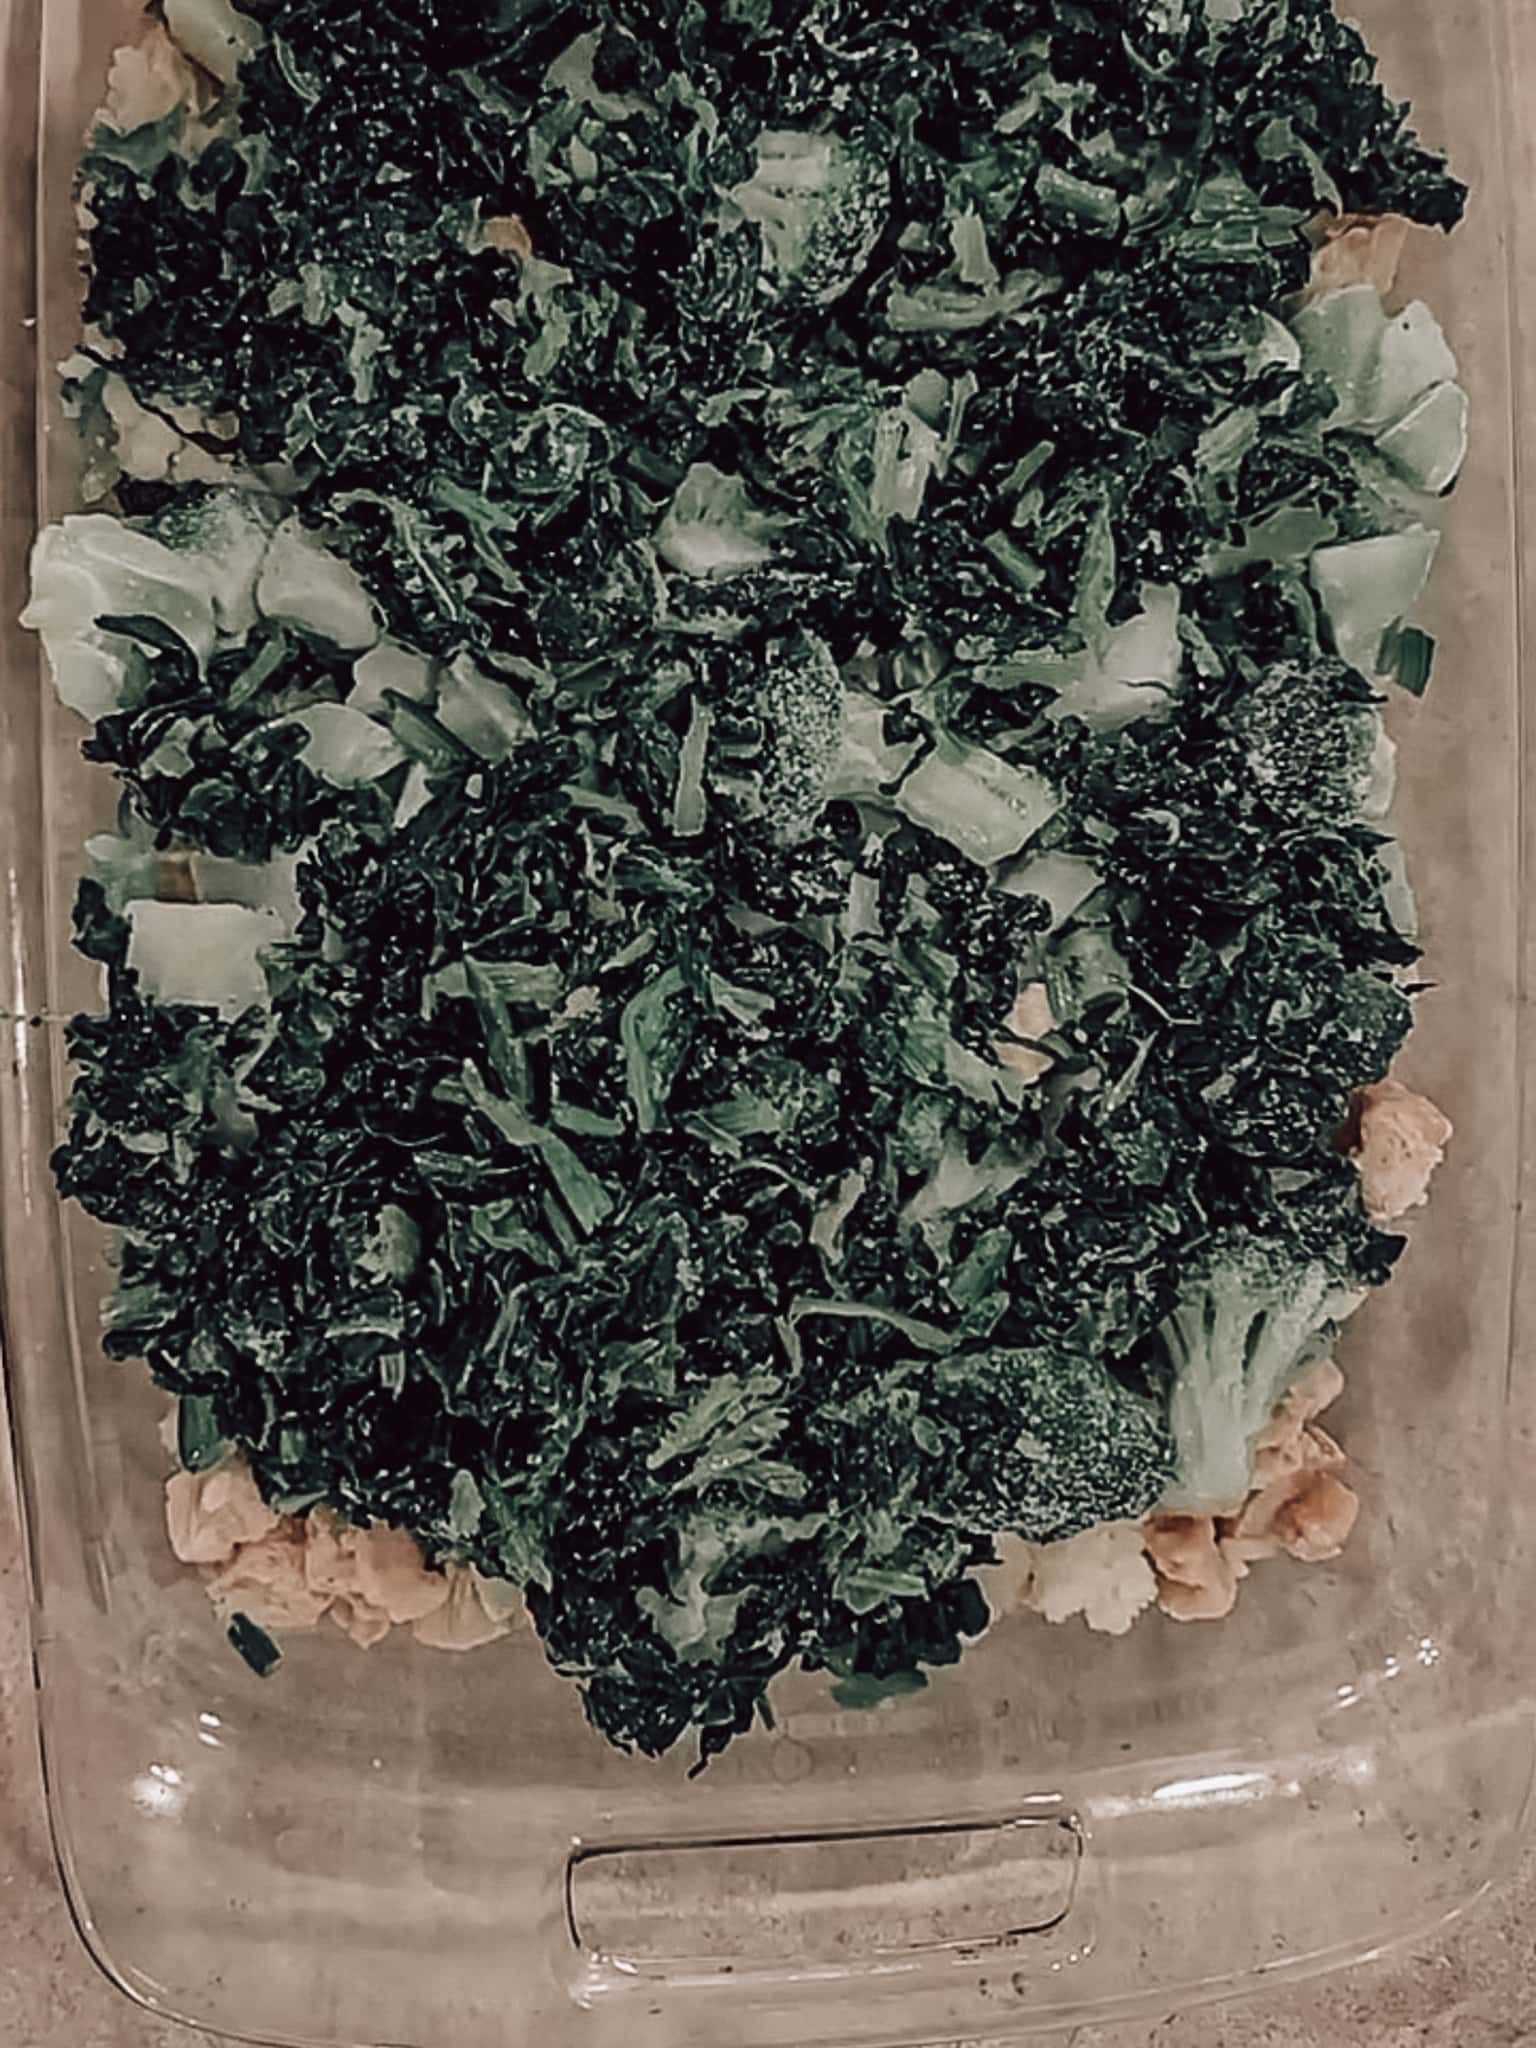 Continue layering the broccoli, riced cauliflower, and spinach.